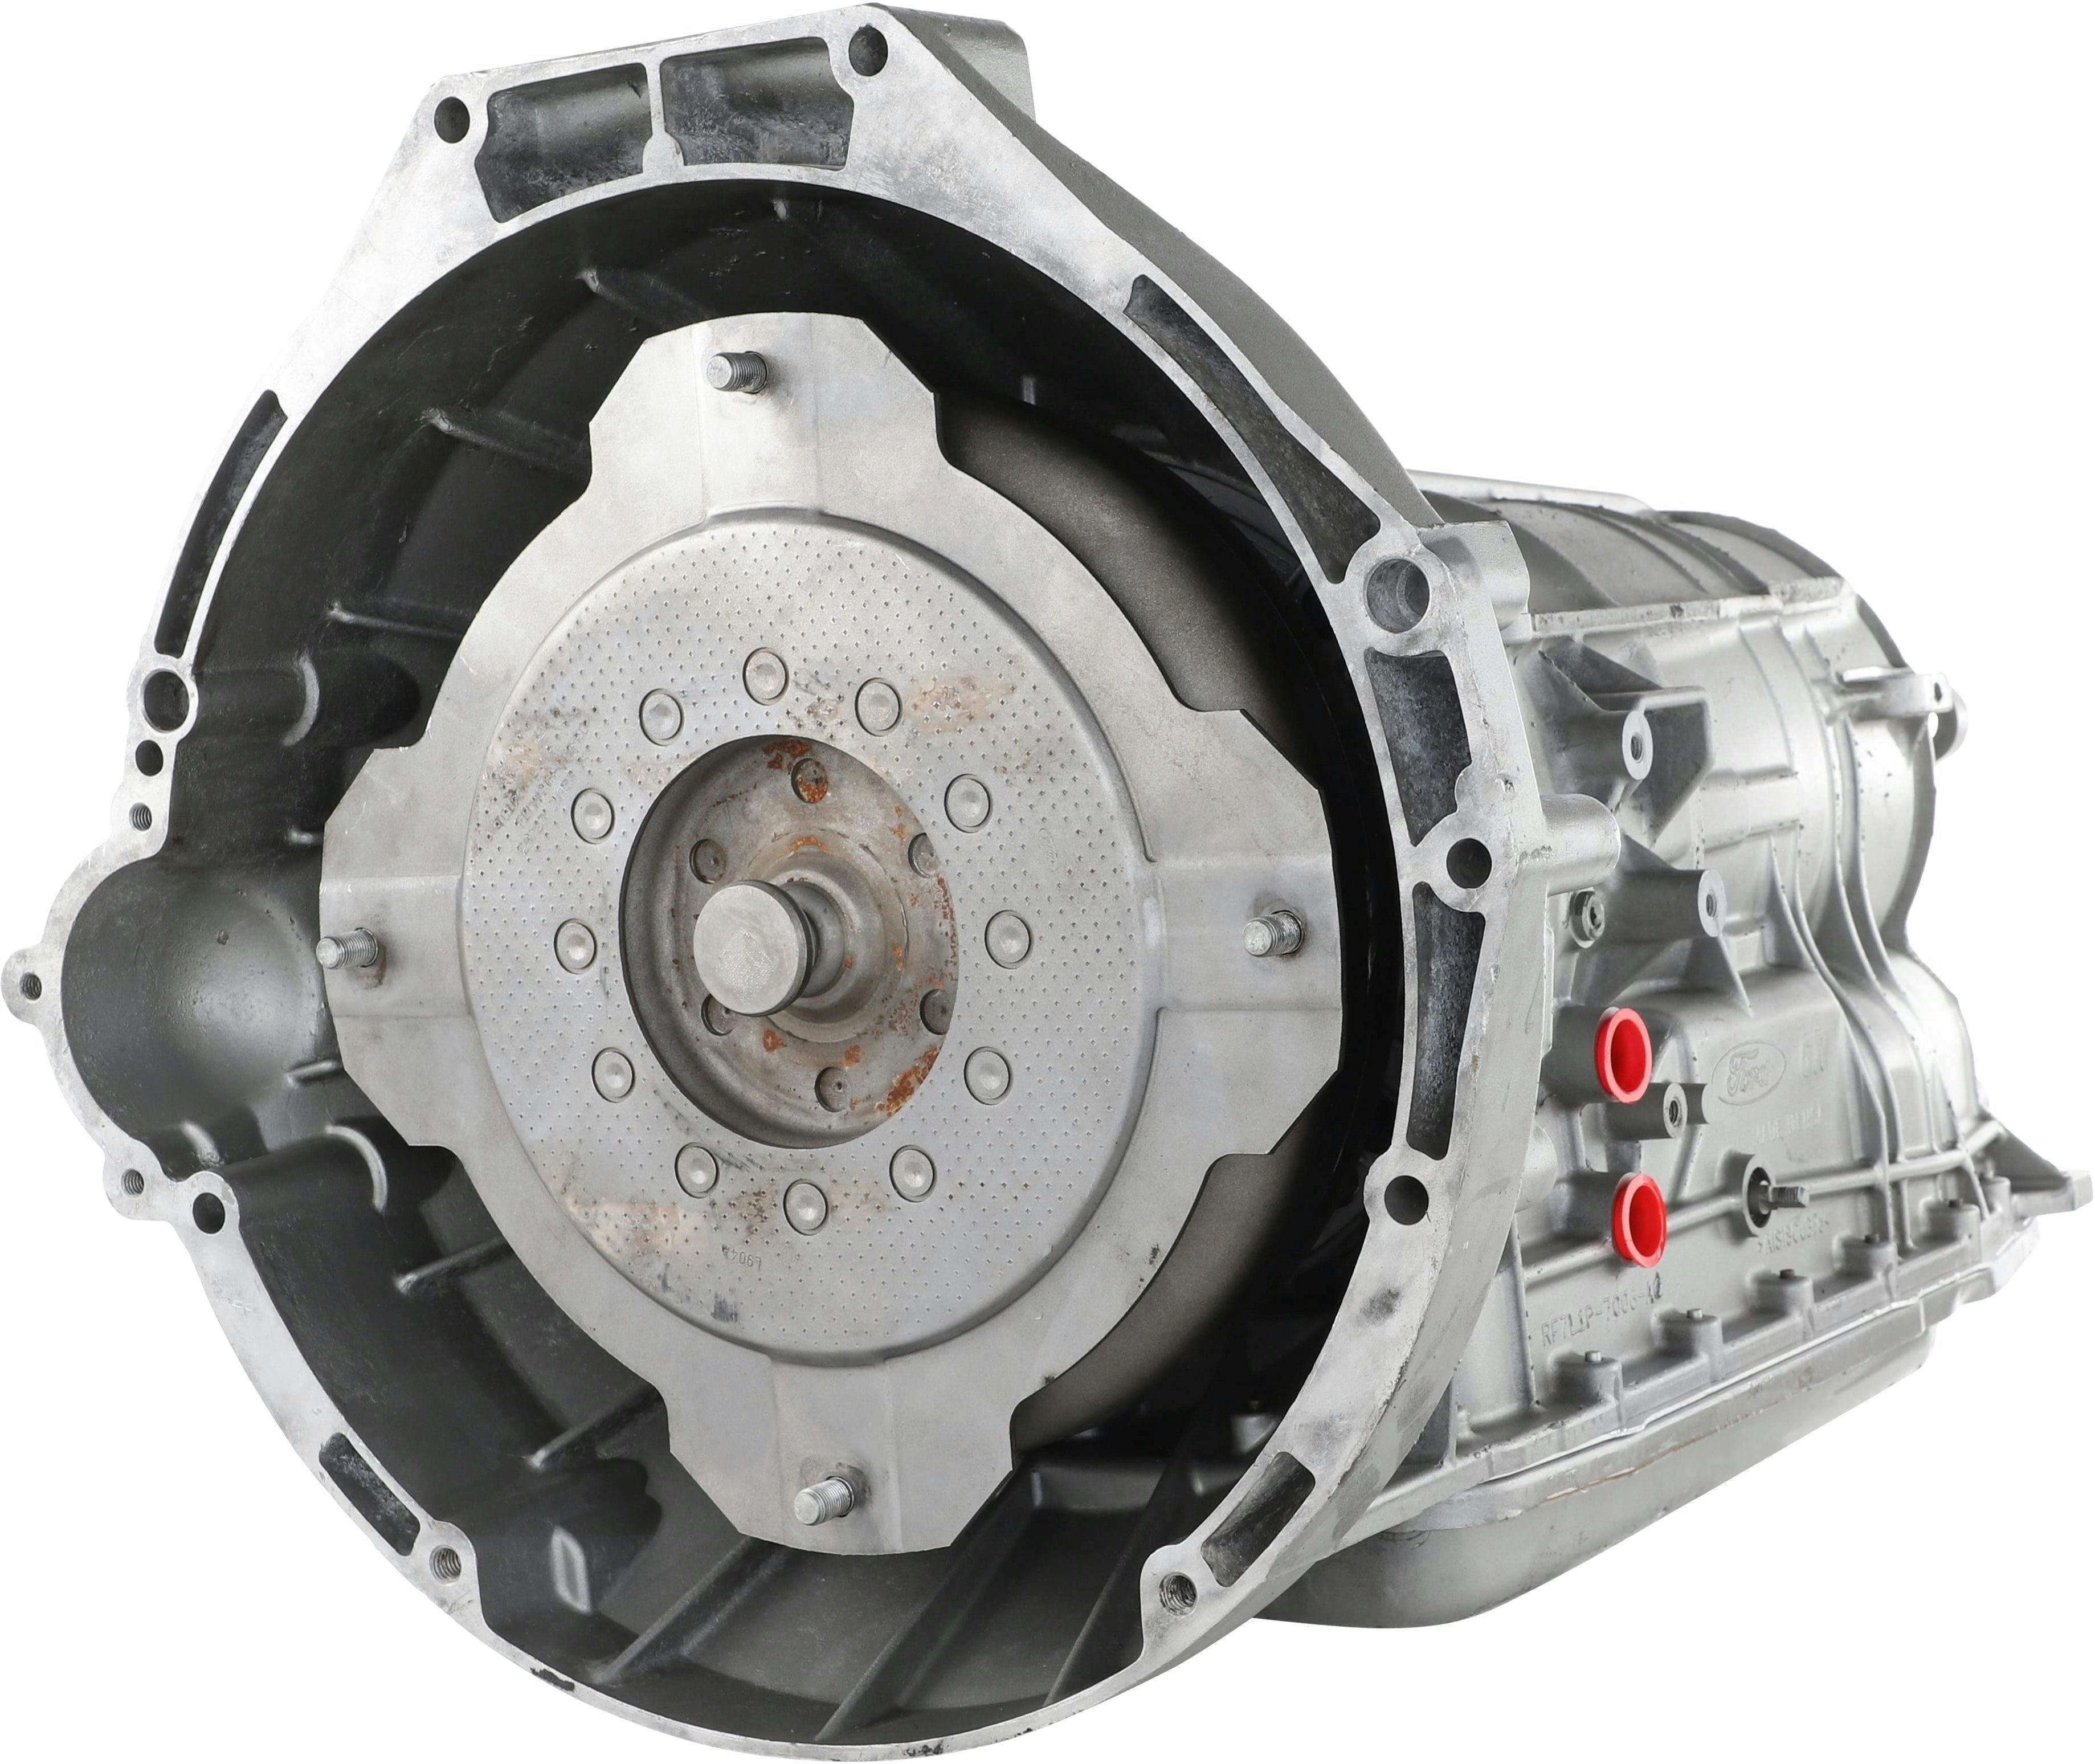 Automatic Transmission for 2007-2008 Ford Expedition RWD with 5.4L V8 Engine